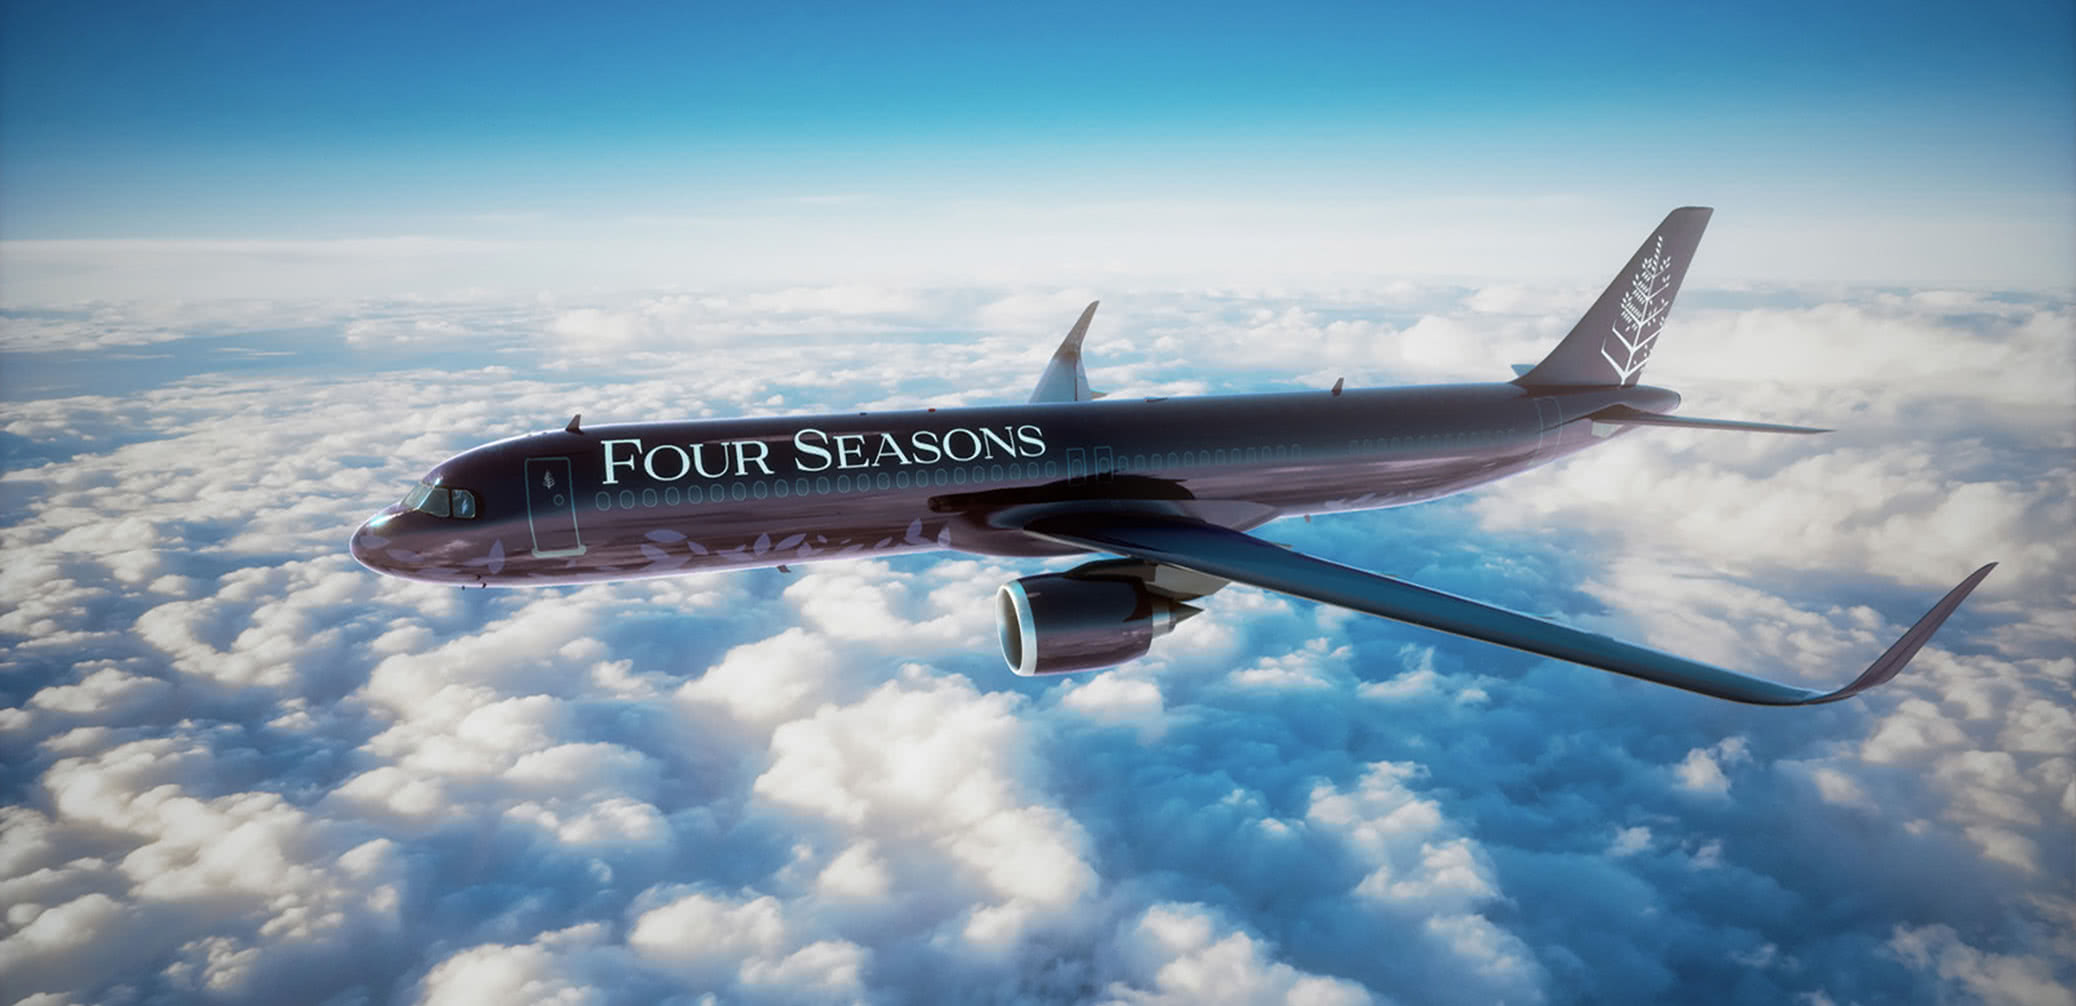 10 Best Private Jet Vacations